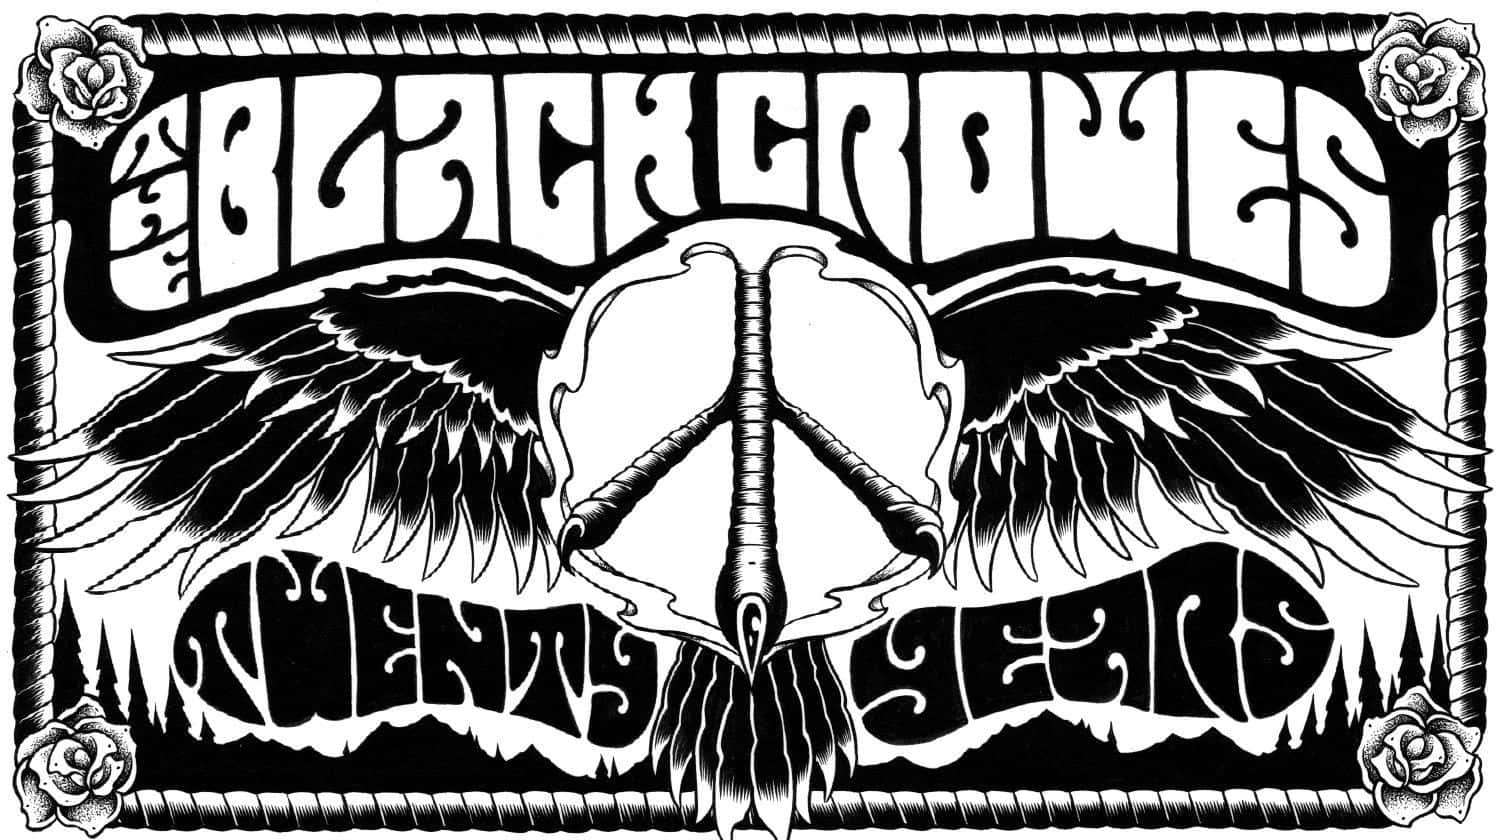 Experience the Rock and Roll Magic of the Black Crowes Wallpaper